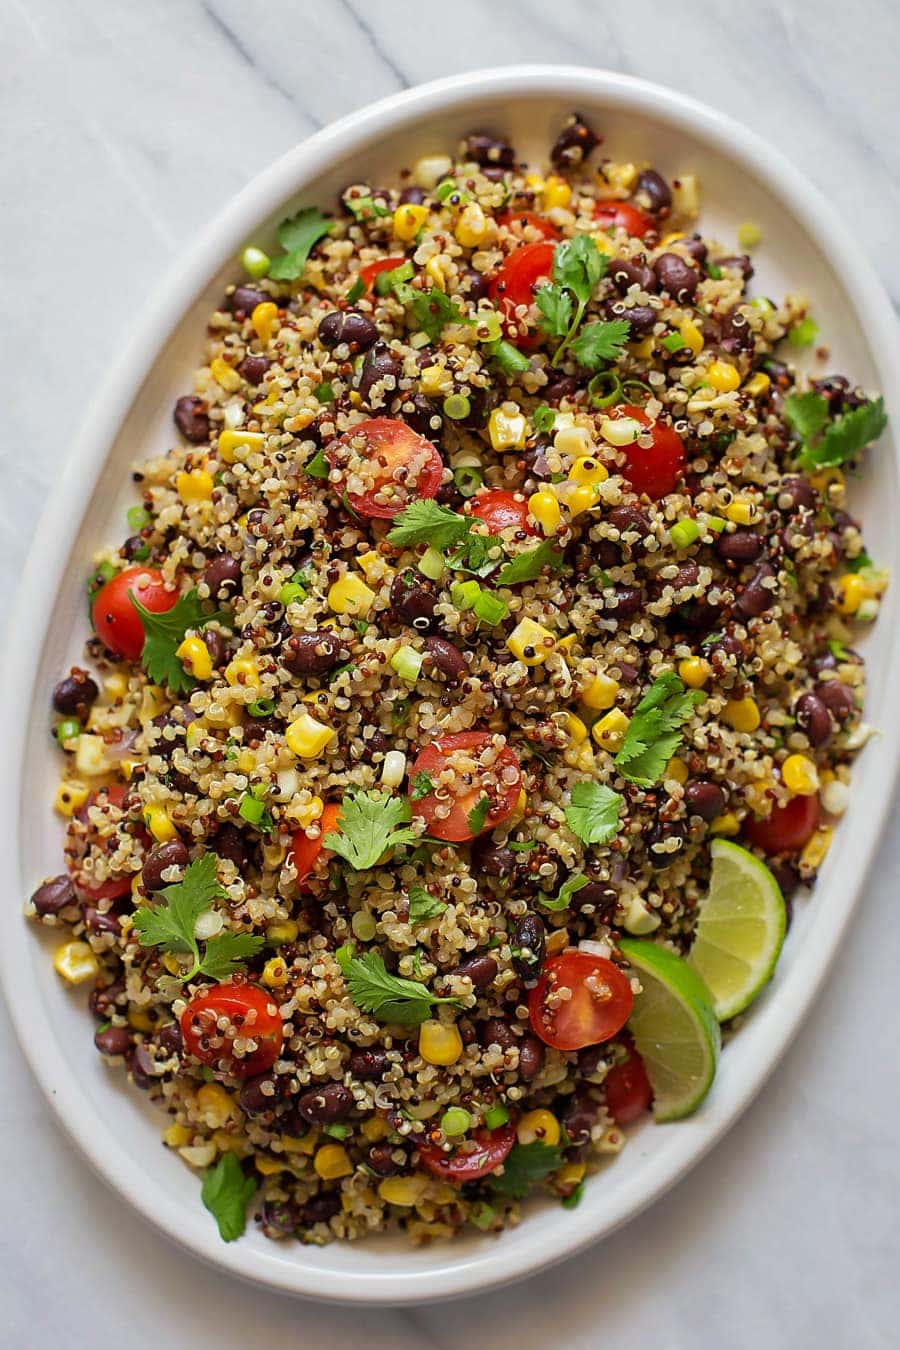 Quinoa Black Bean Salad topped with fresh cilantro and limes served in a white platter